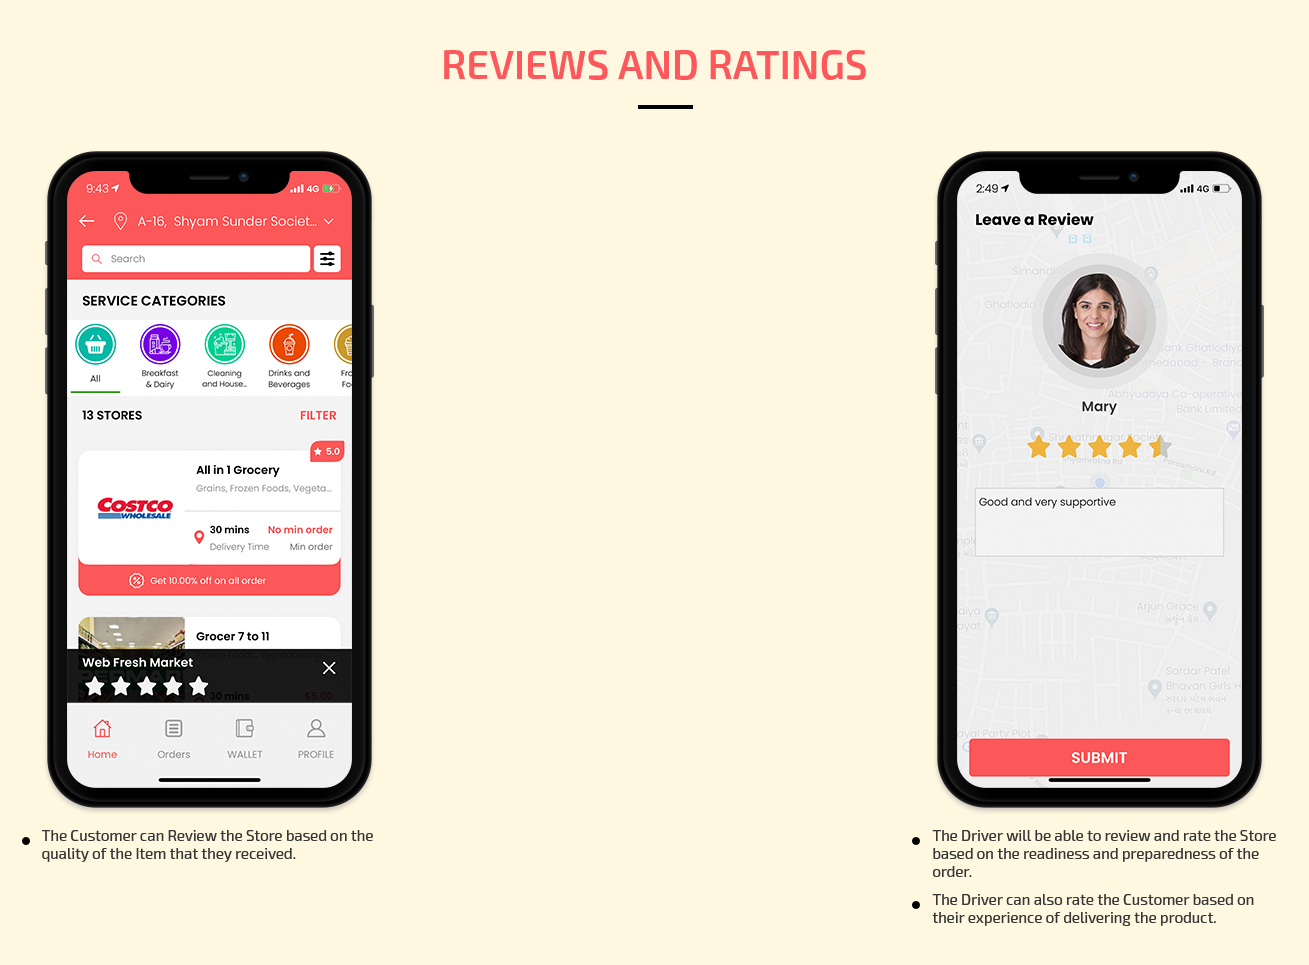 user rate & review to Stores & driver